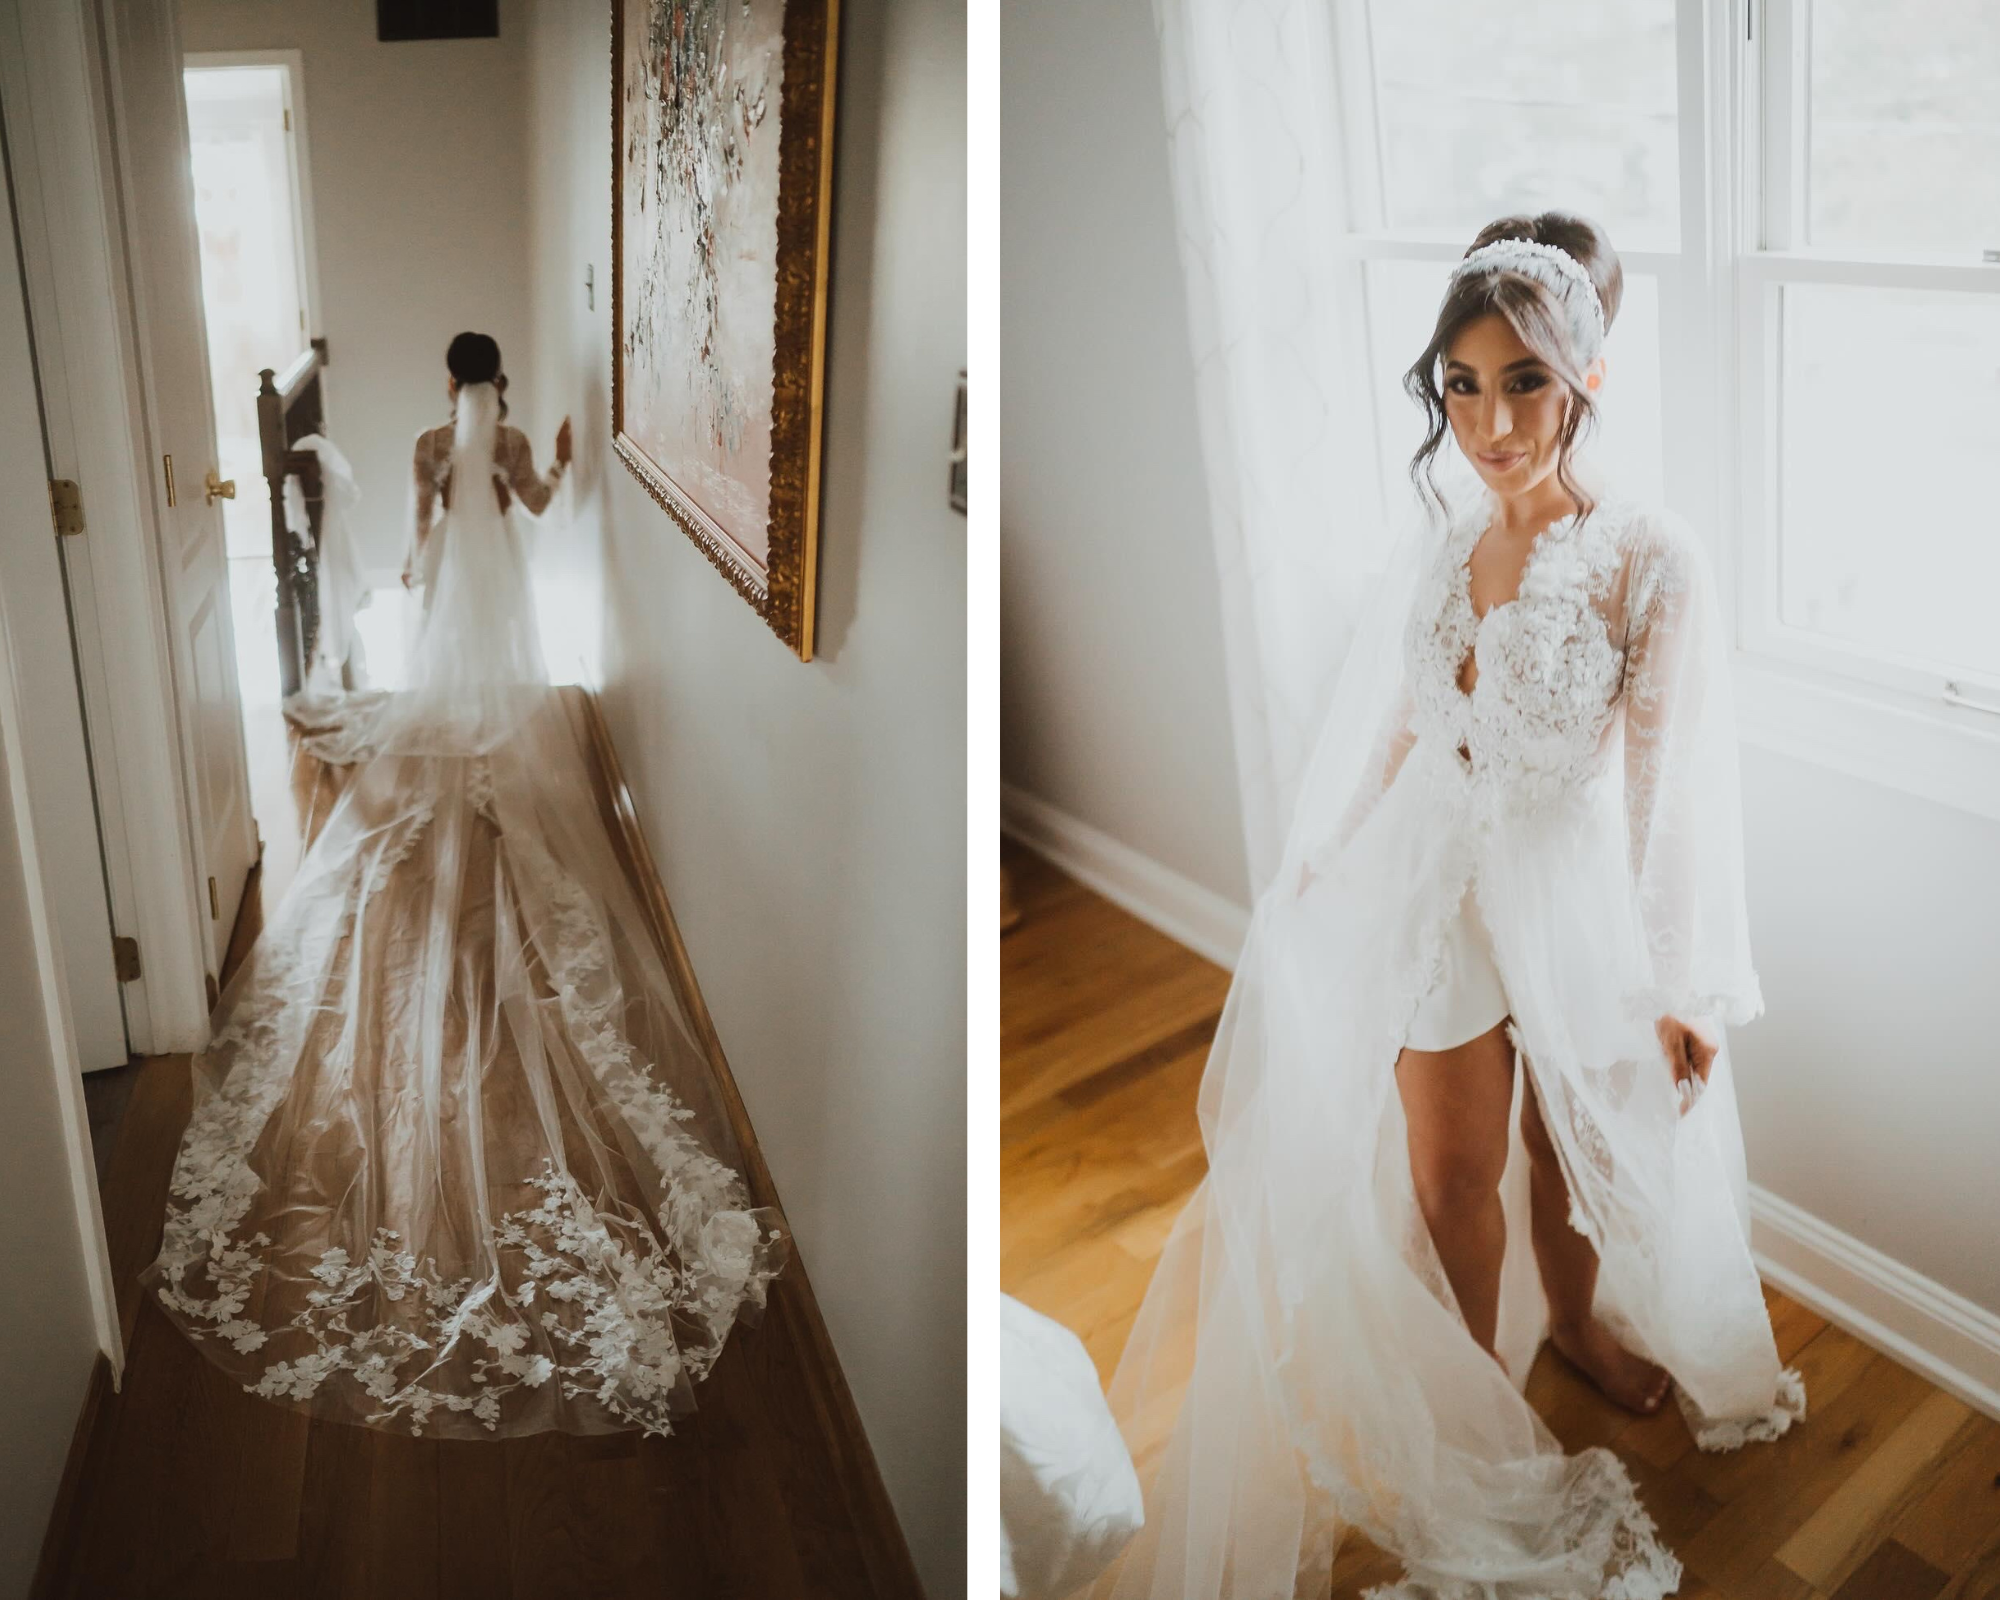 Our beautiful bride getting ready in her Lé Laurier robe, Swarovski crystal bridal headpiece, embroidered cathedral veil, and earrings.